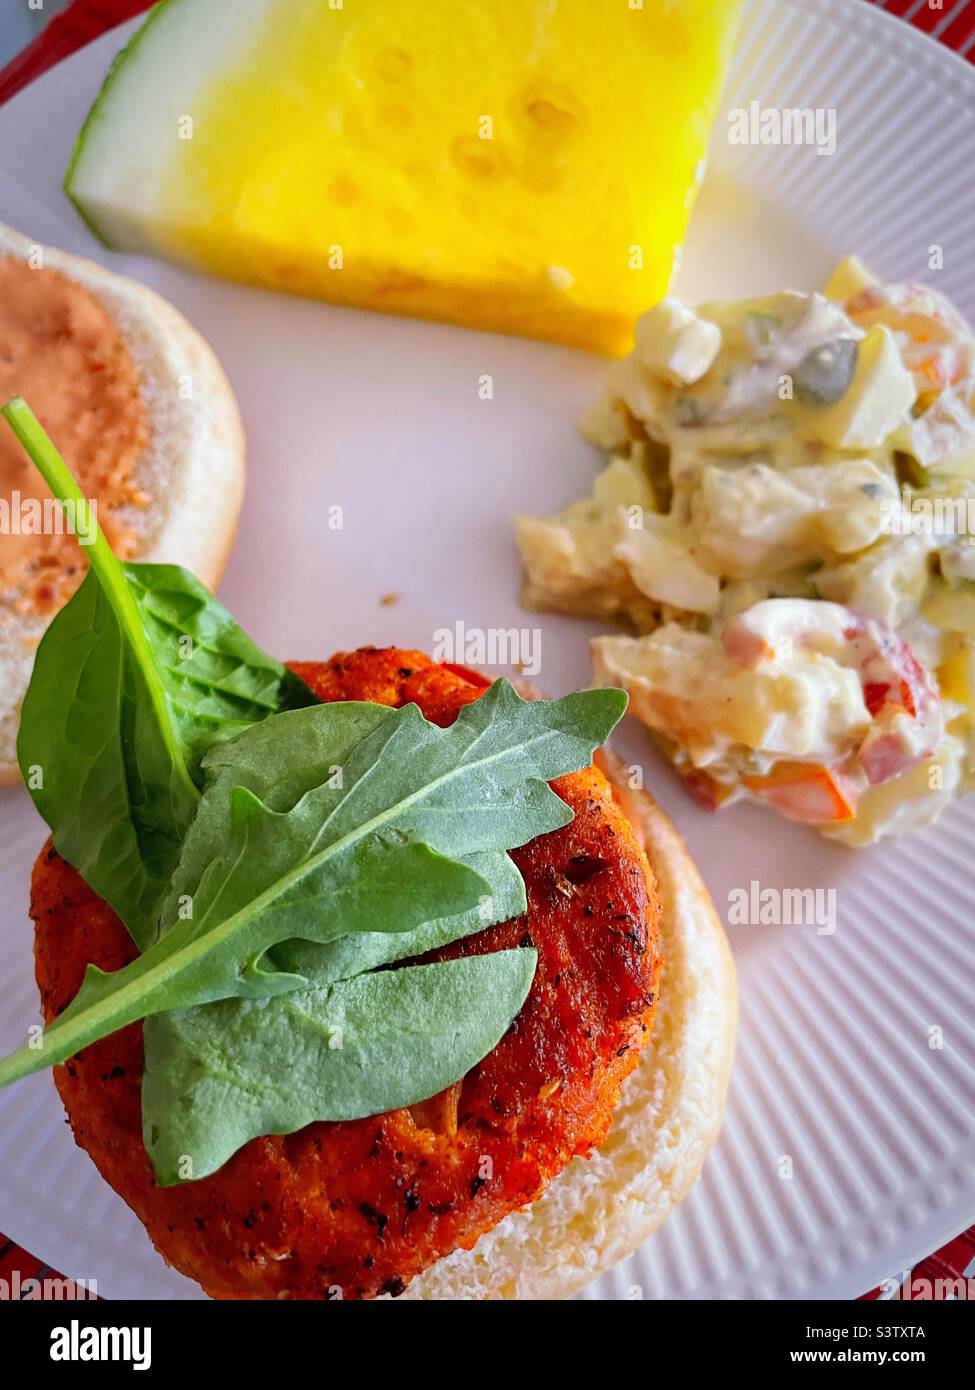 Close-up of a summertime meal of salmon burger, yellow watermelon and homemade potato salad, 2022, USA Stock Photo